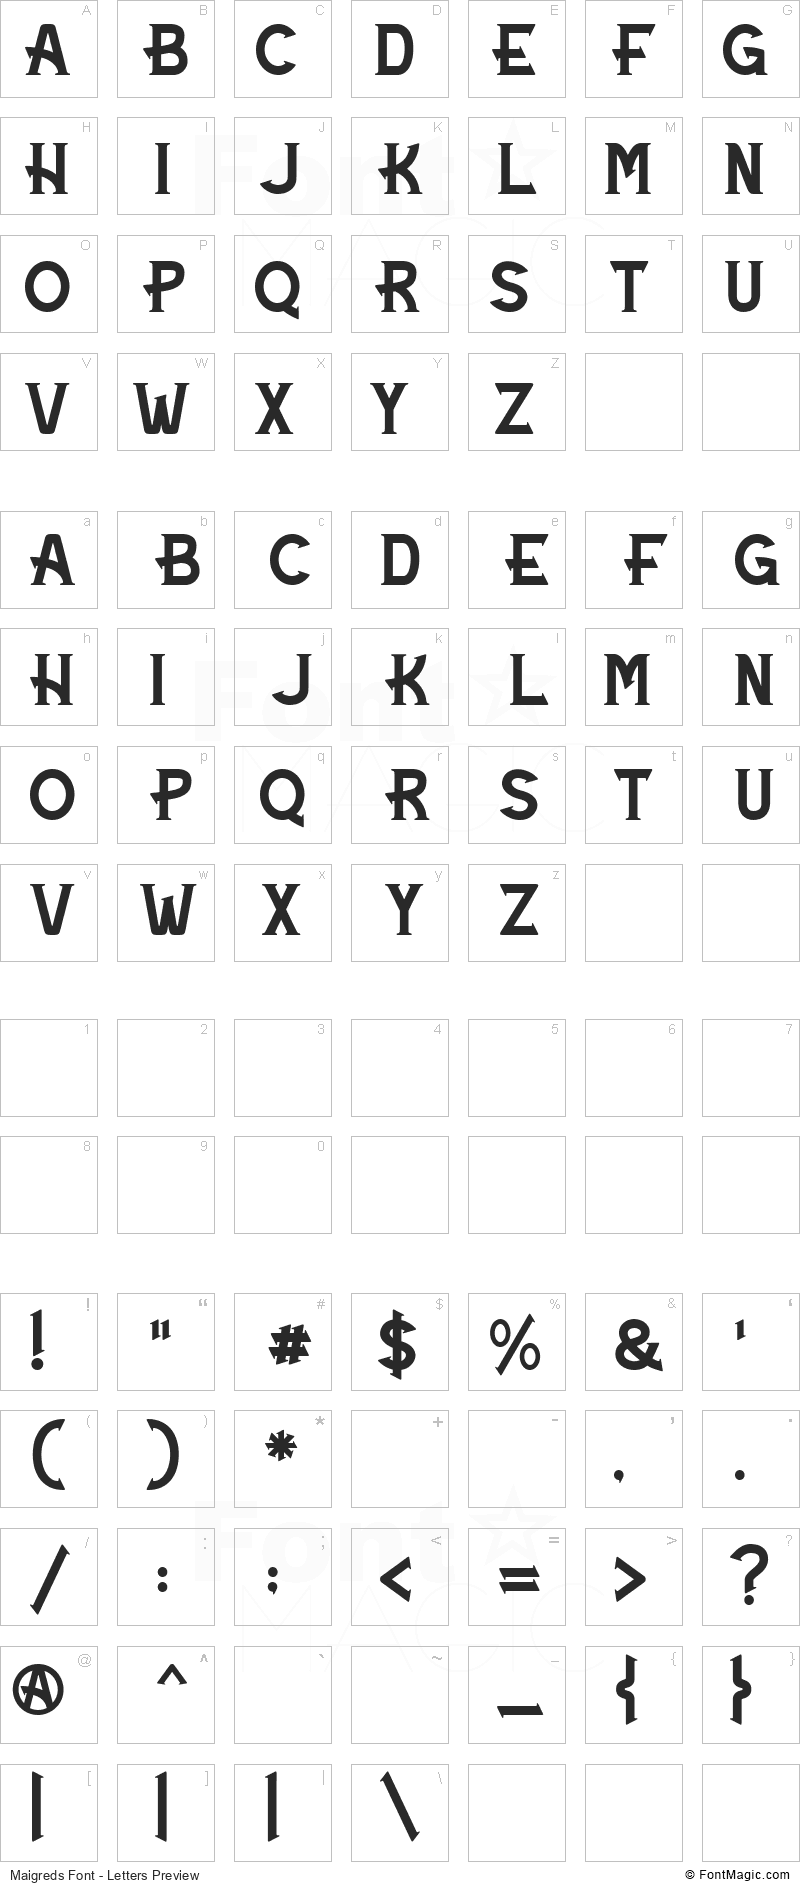 Maigreds Font - All Latters Preview Chart